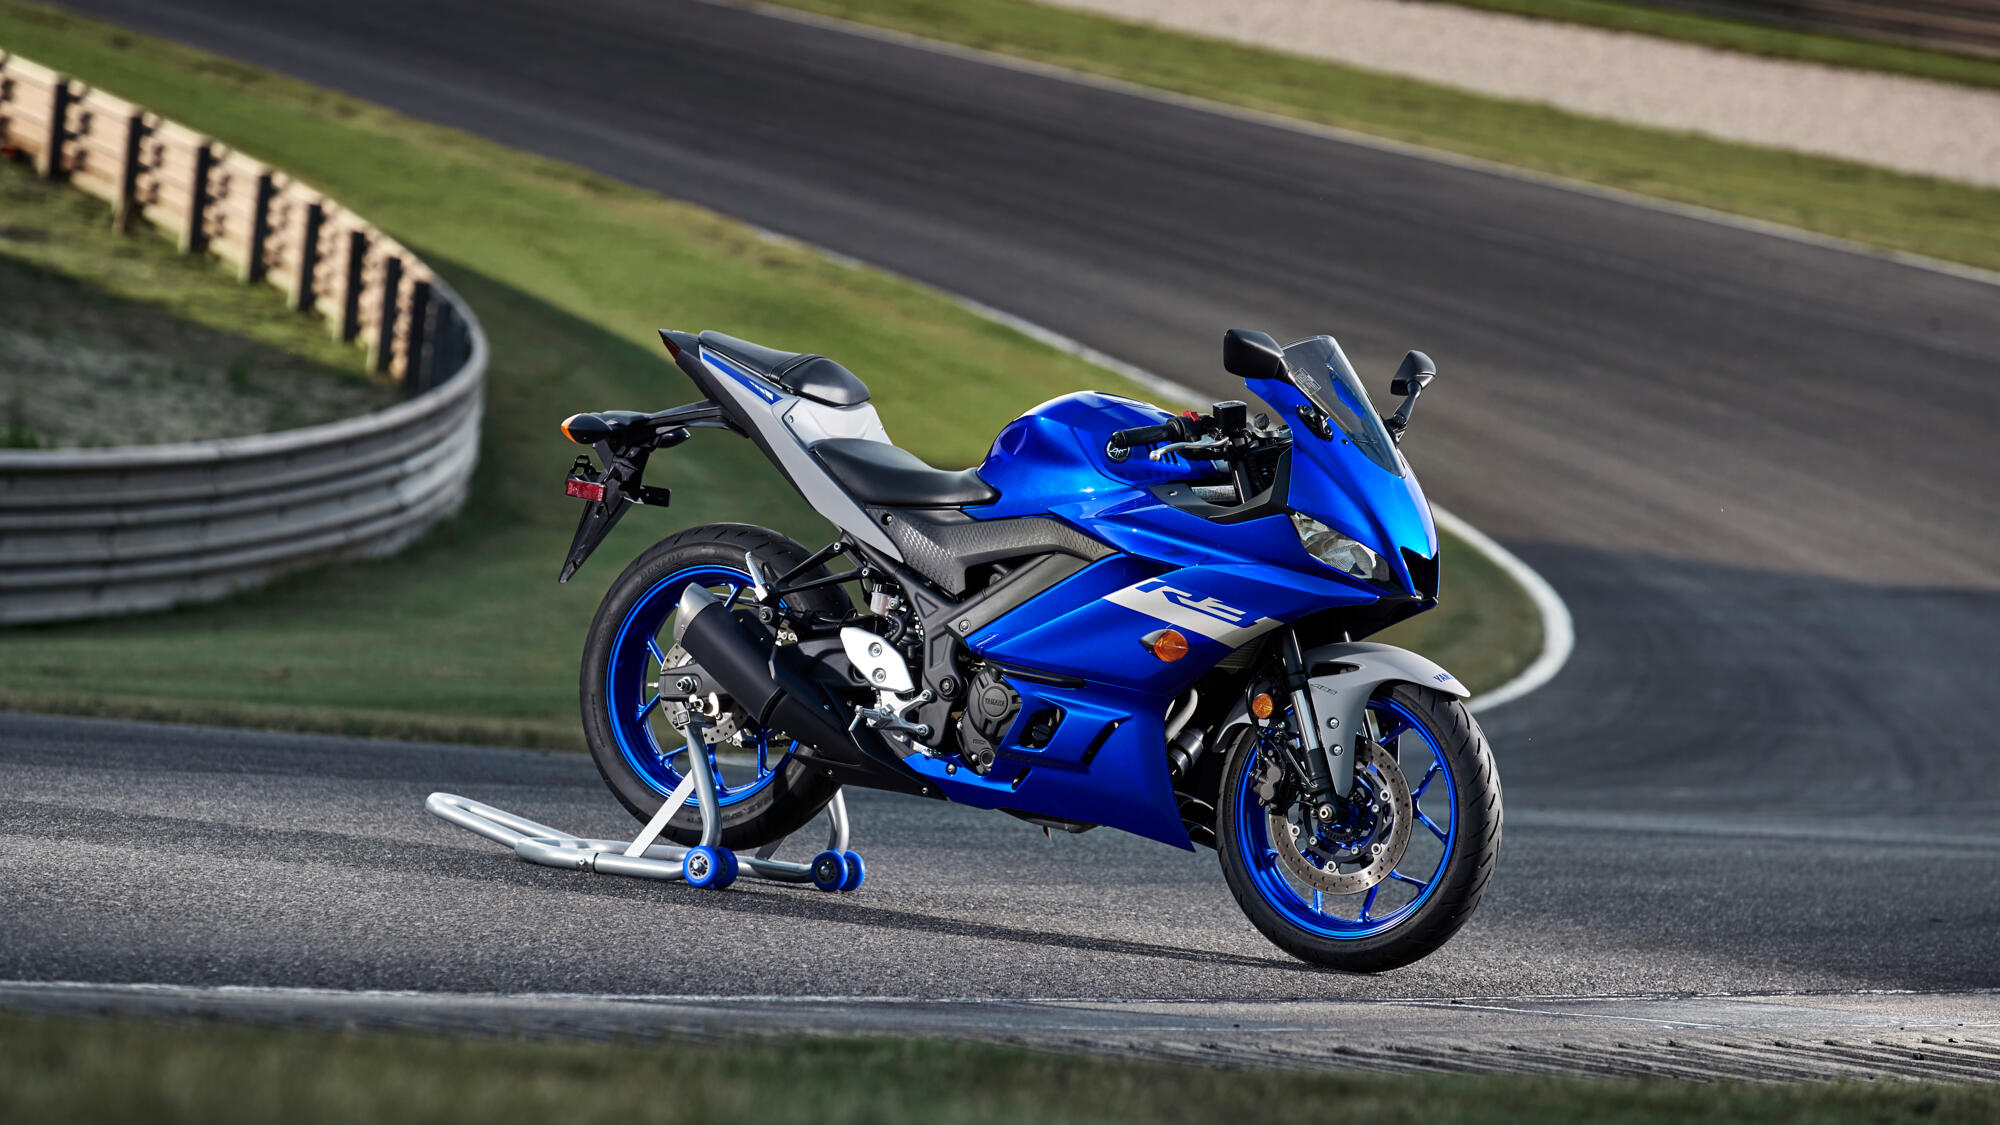 Yamaha R3 Launching in India or Not? - Here's What We Know So Far - landscape